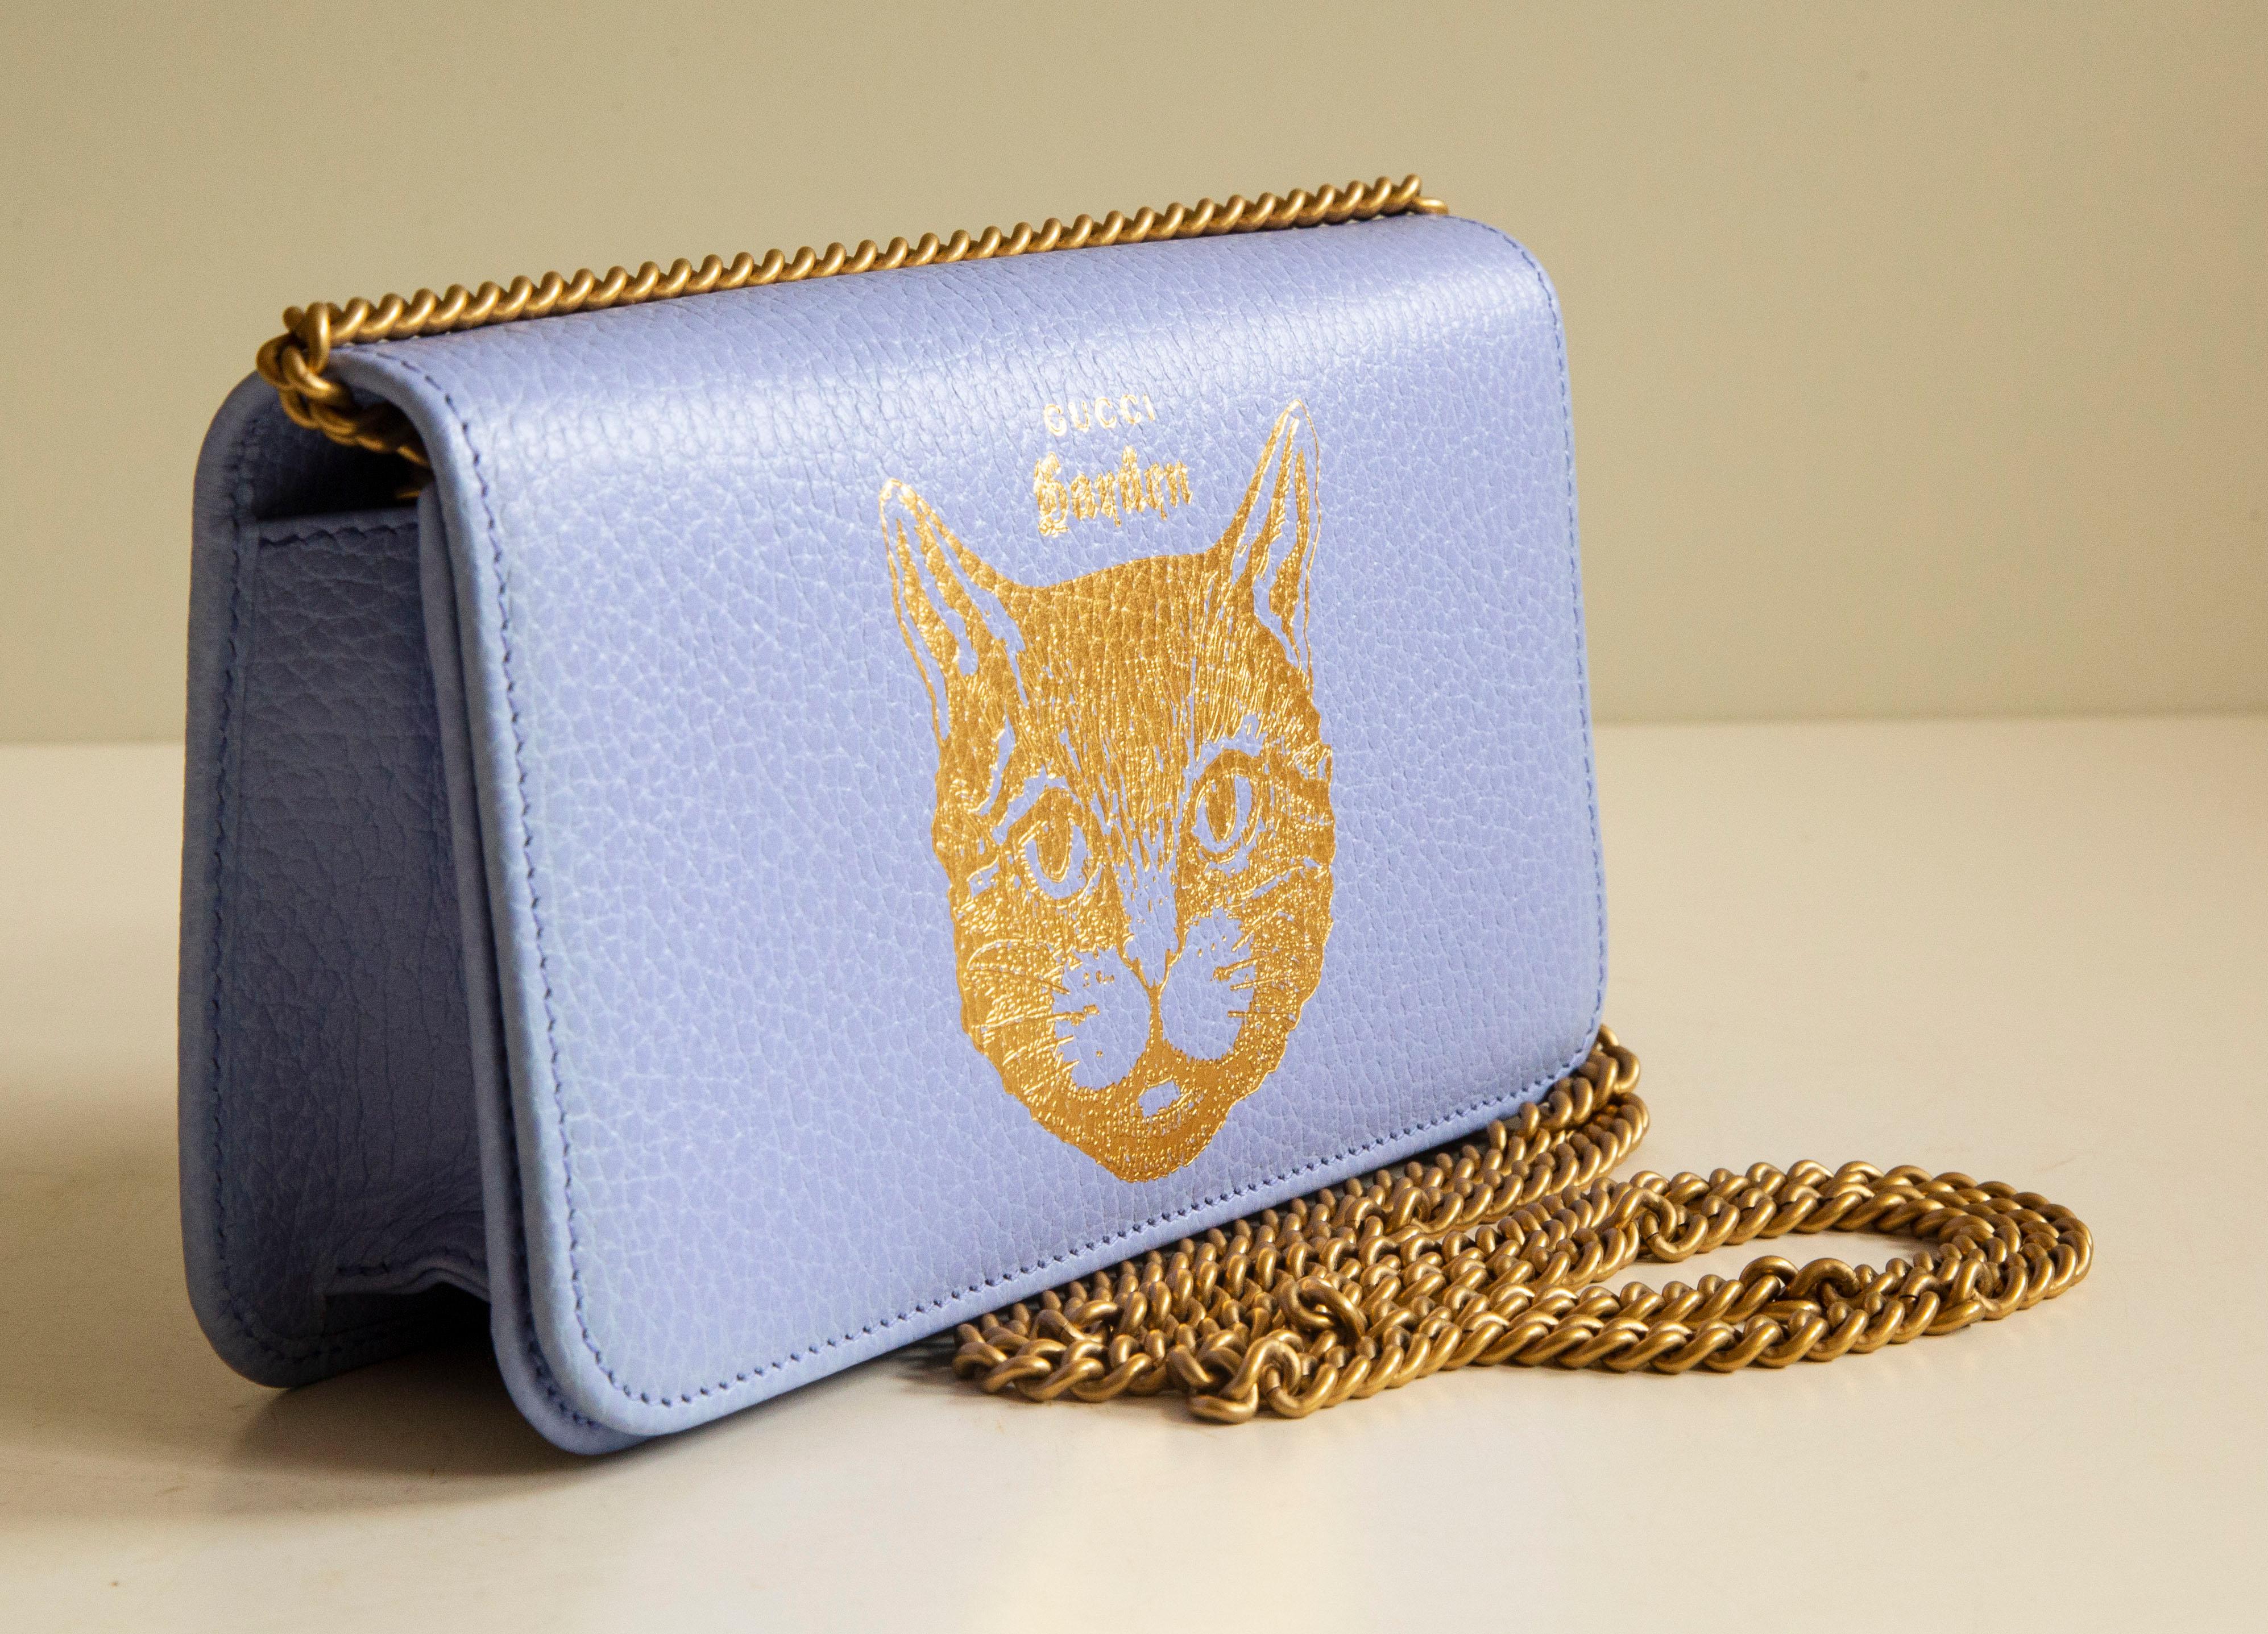 A Gucci Garden calfskin limited edition cat chain pouch in light Lila color. The bag opens and closes with a magnetic flap and there is one key hanger on the side of the bag. The interior is made of blue fabric. The condition is excellent without